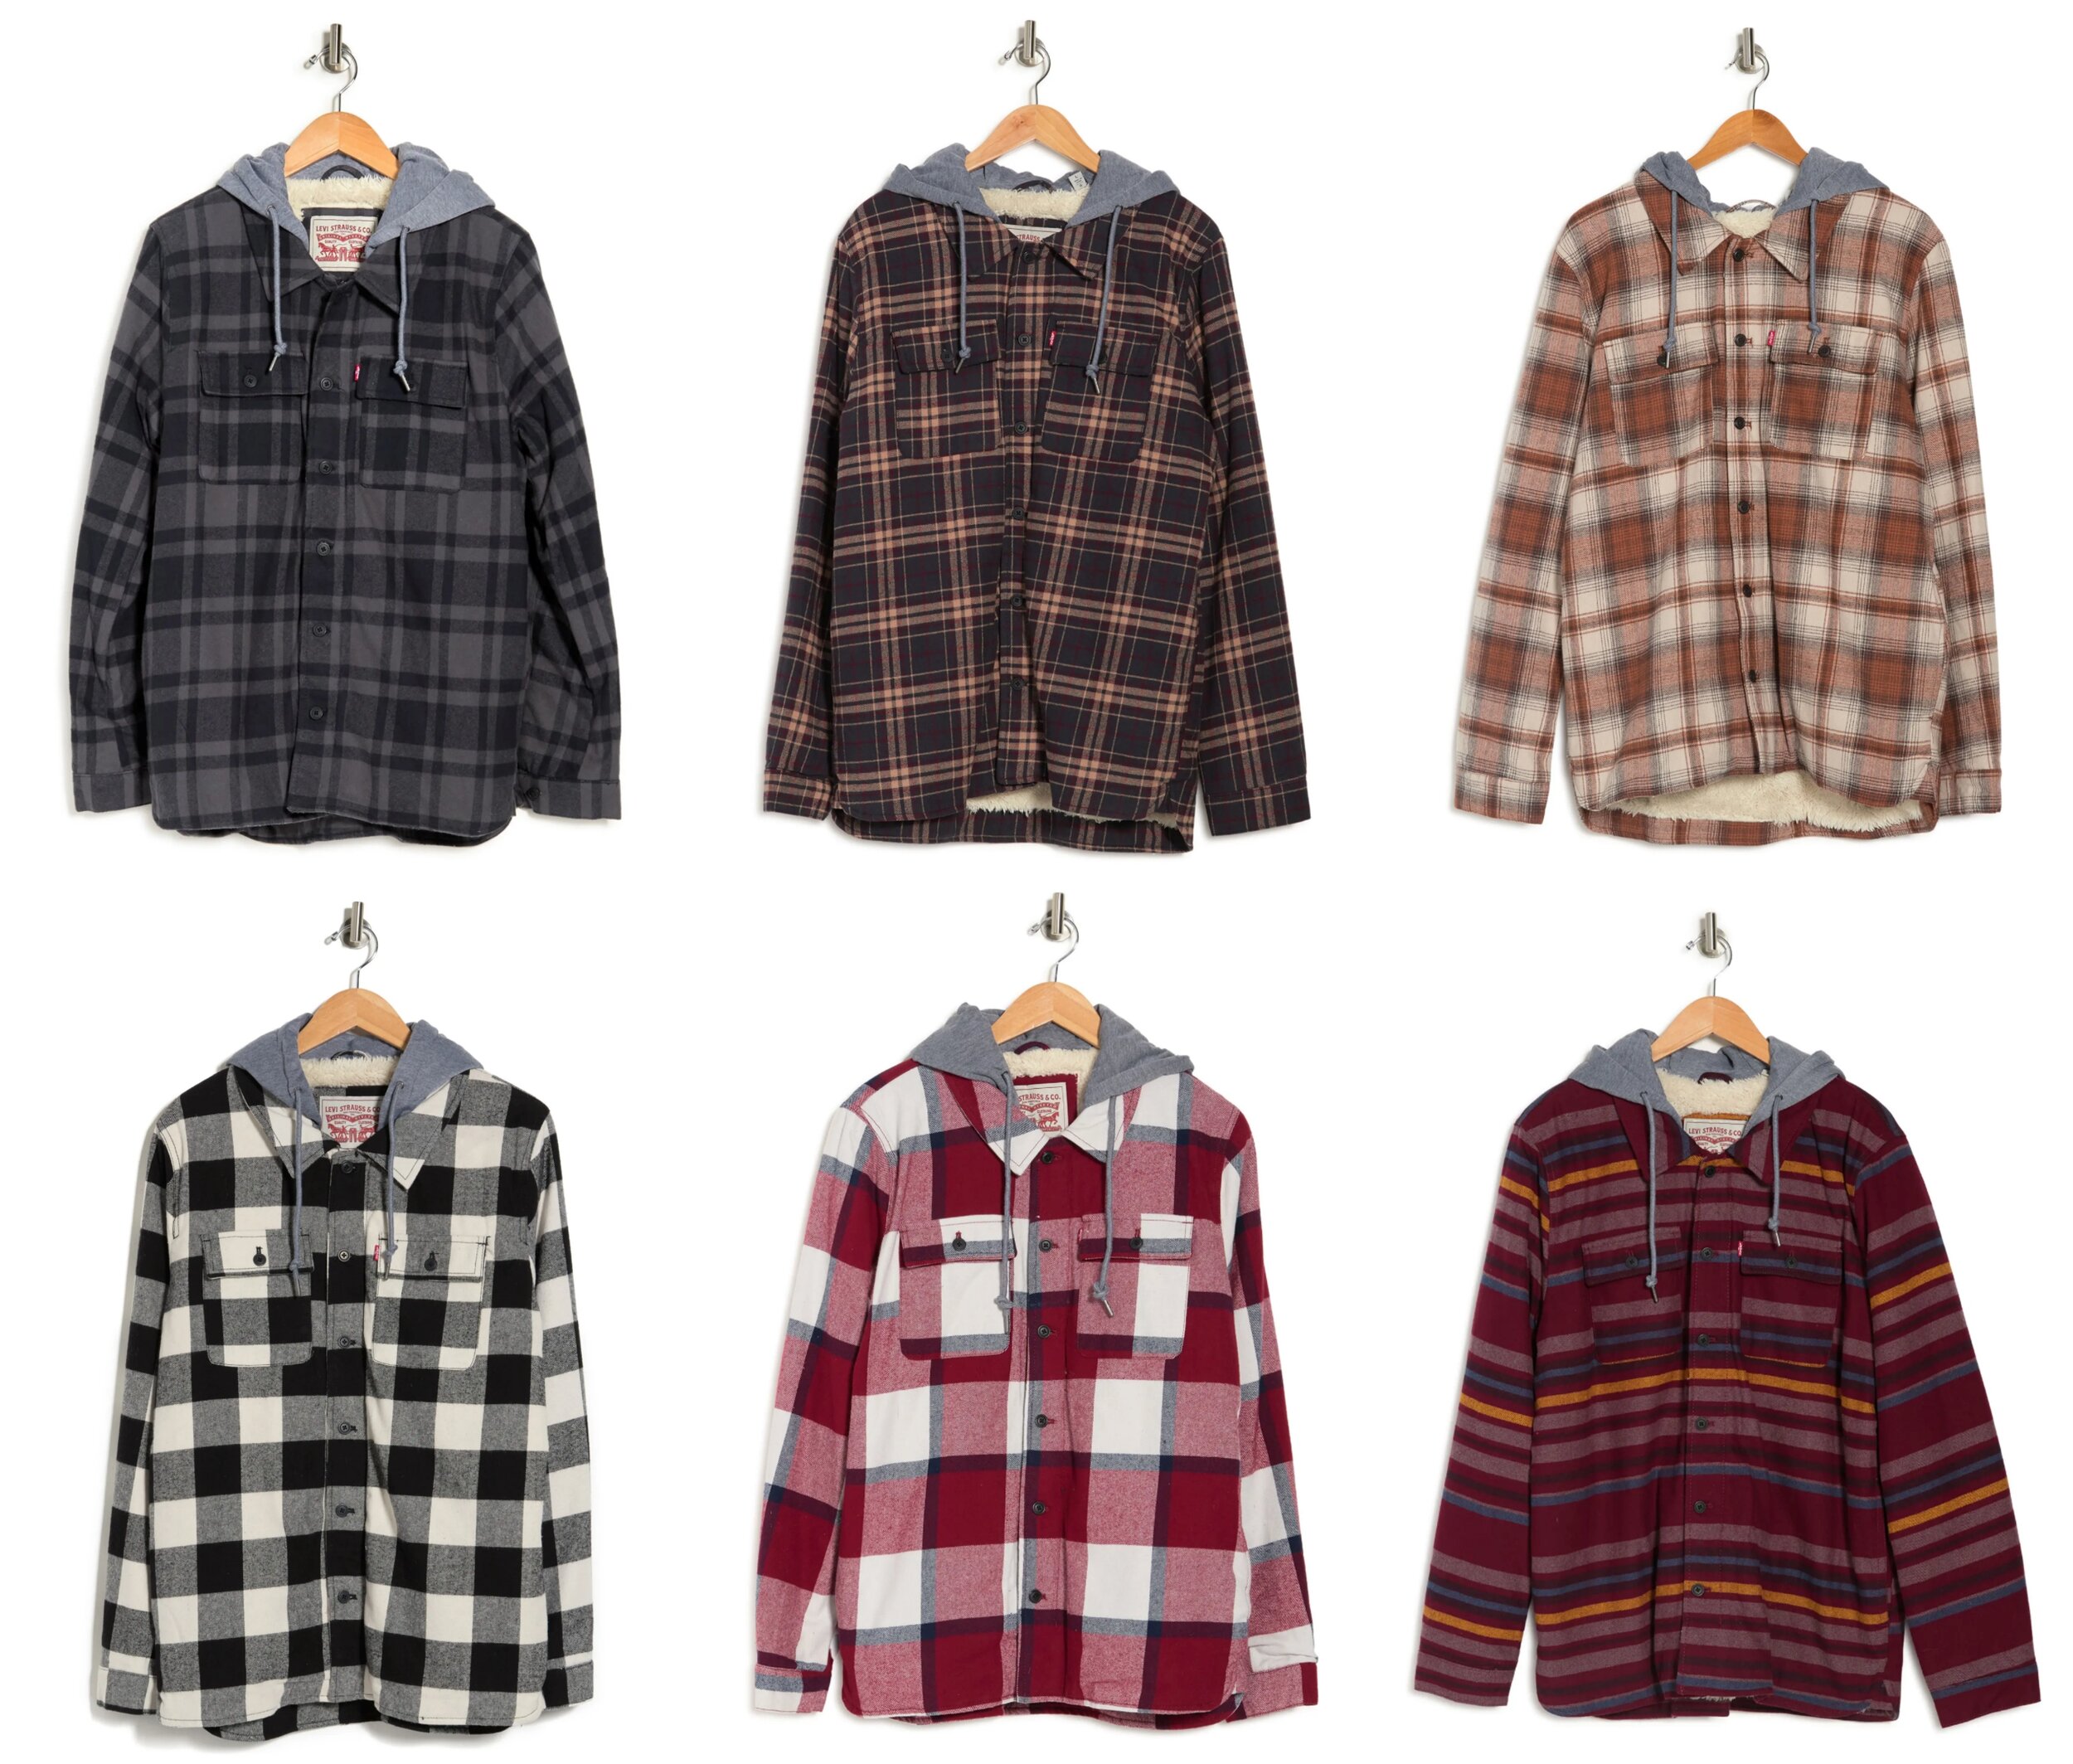 Nearly 60% OFF the Levi's Faux Fur Checkered Fleece Jackets — Sneaker Shouts